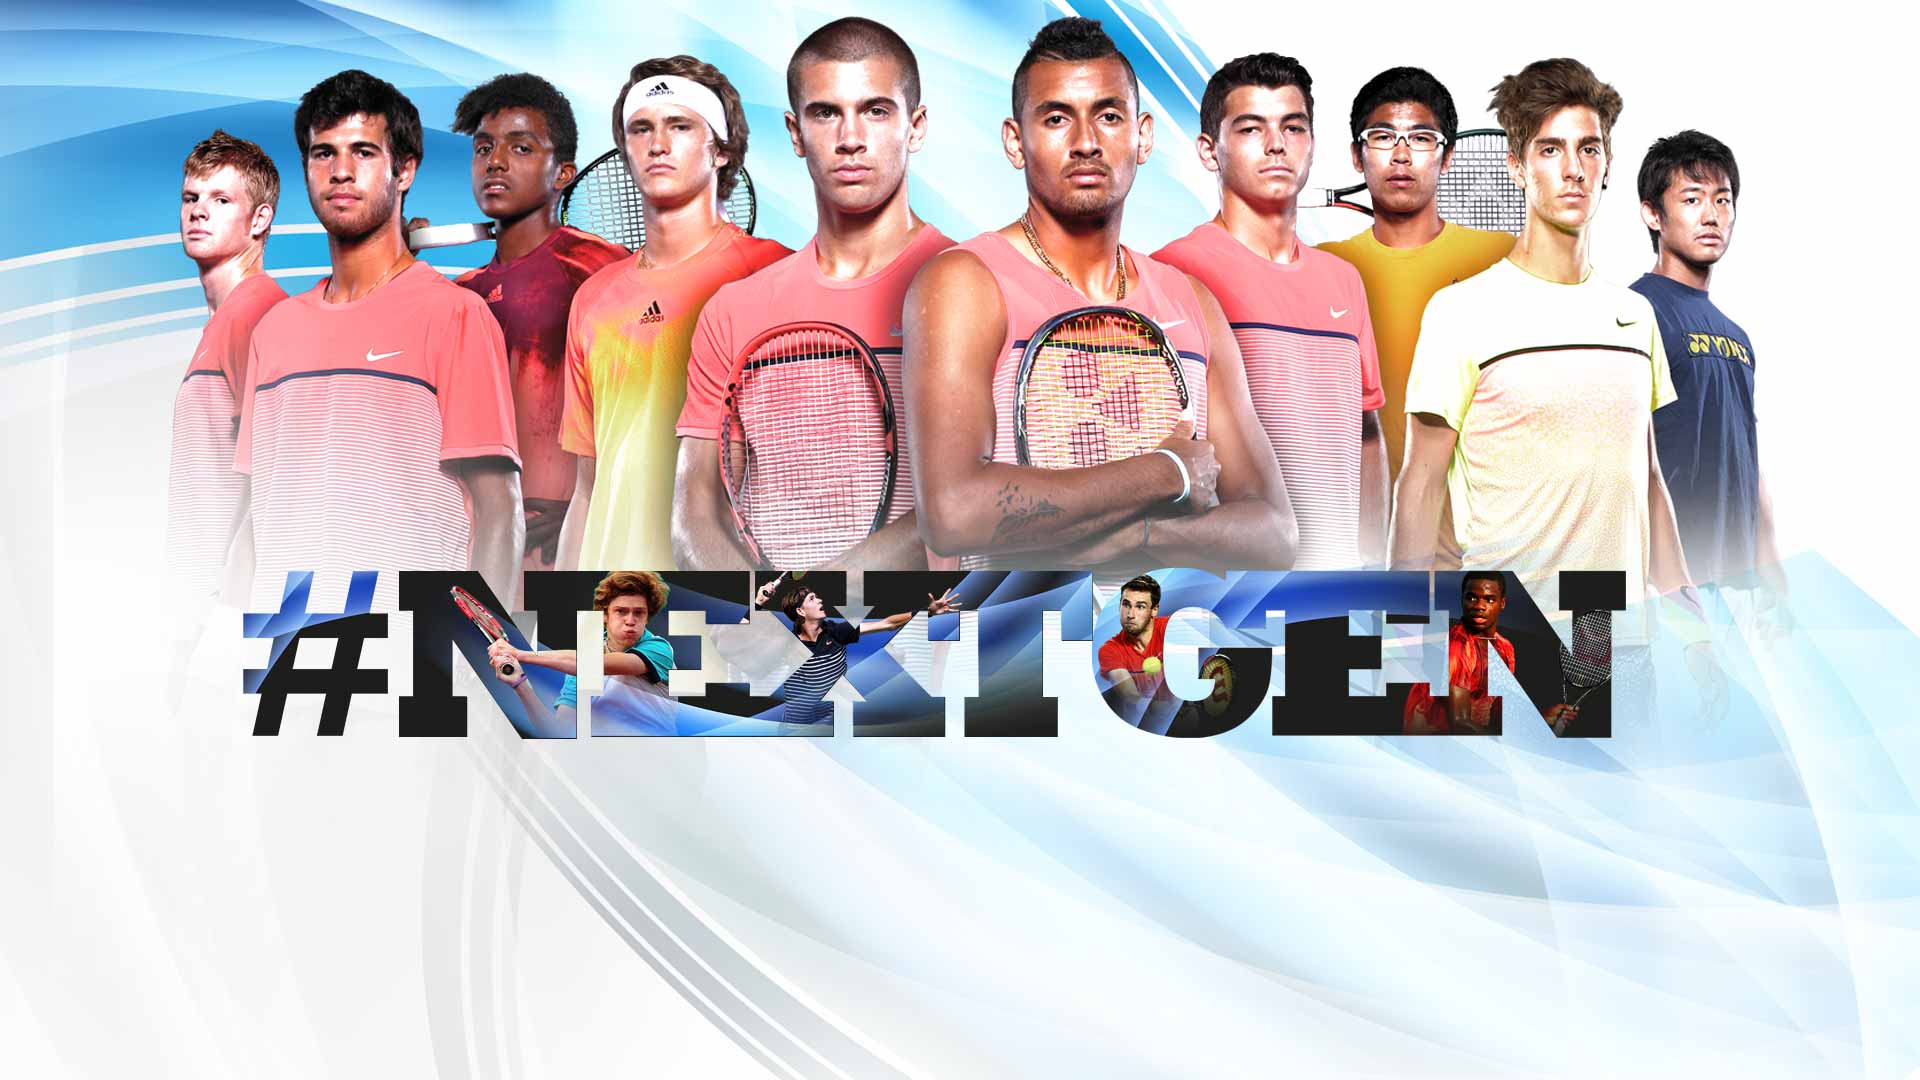 The ATP launches the 'Next Generation', a group of 14 players aged 21 and under.